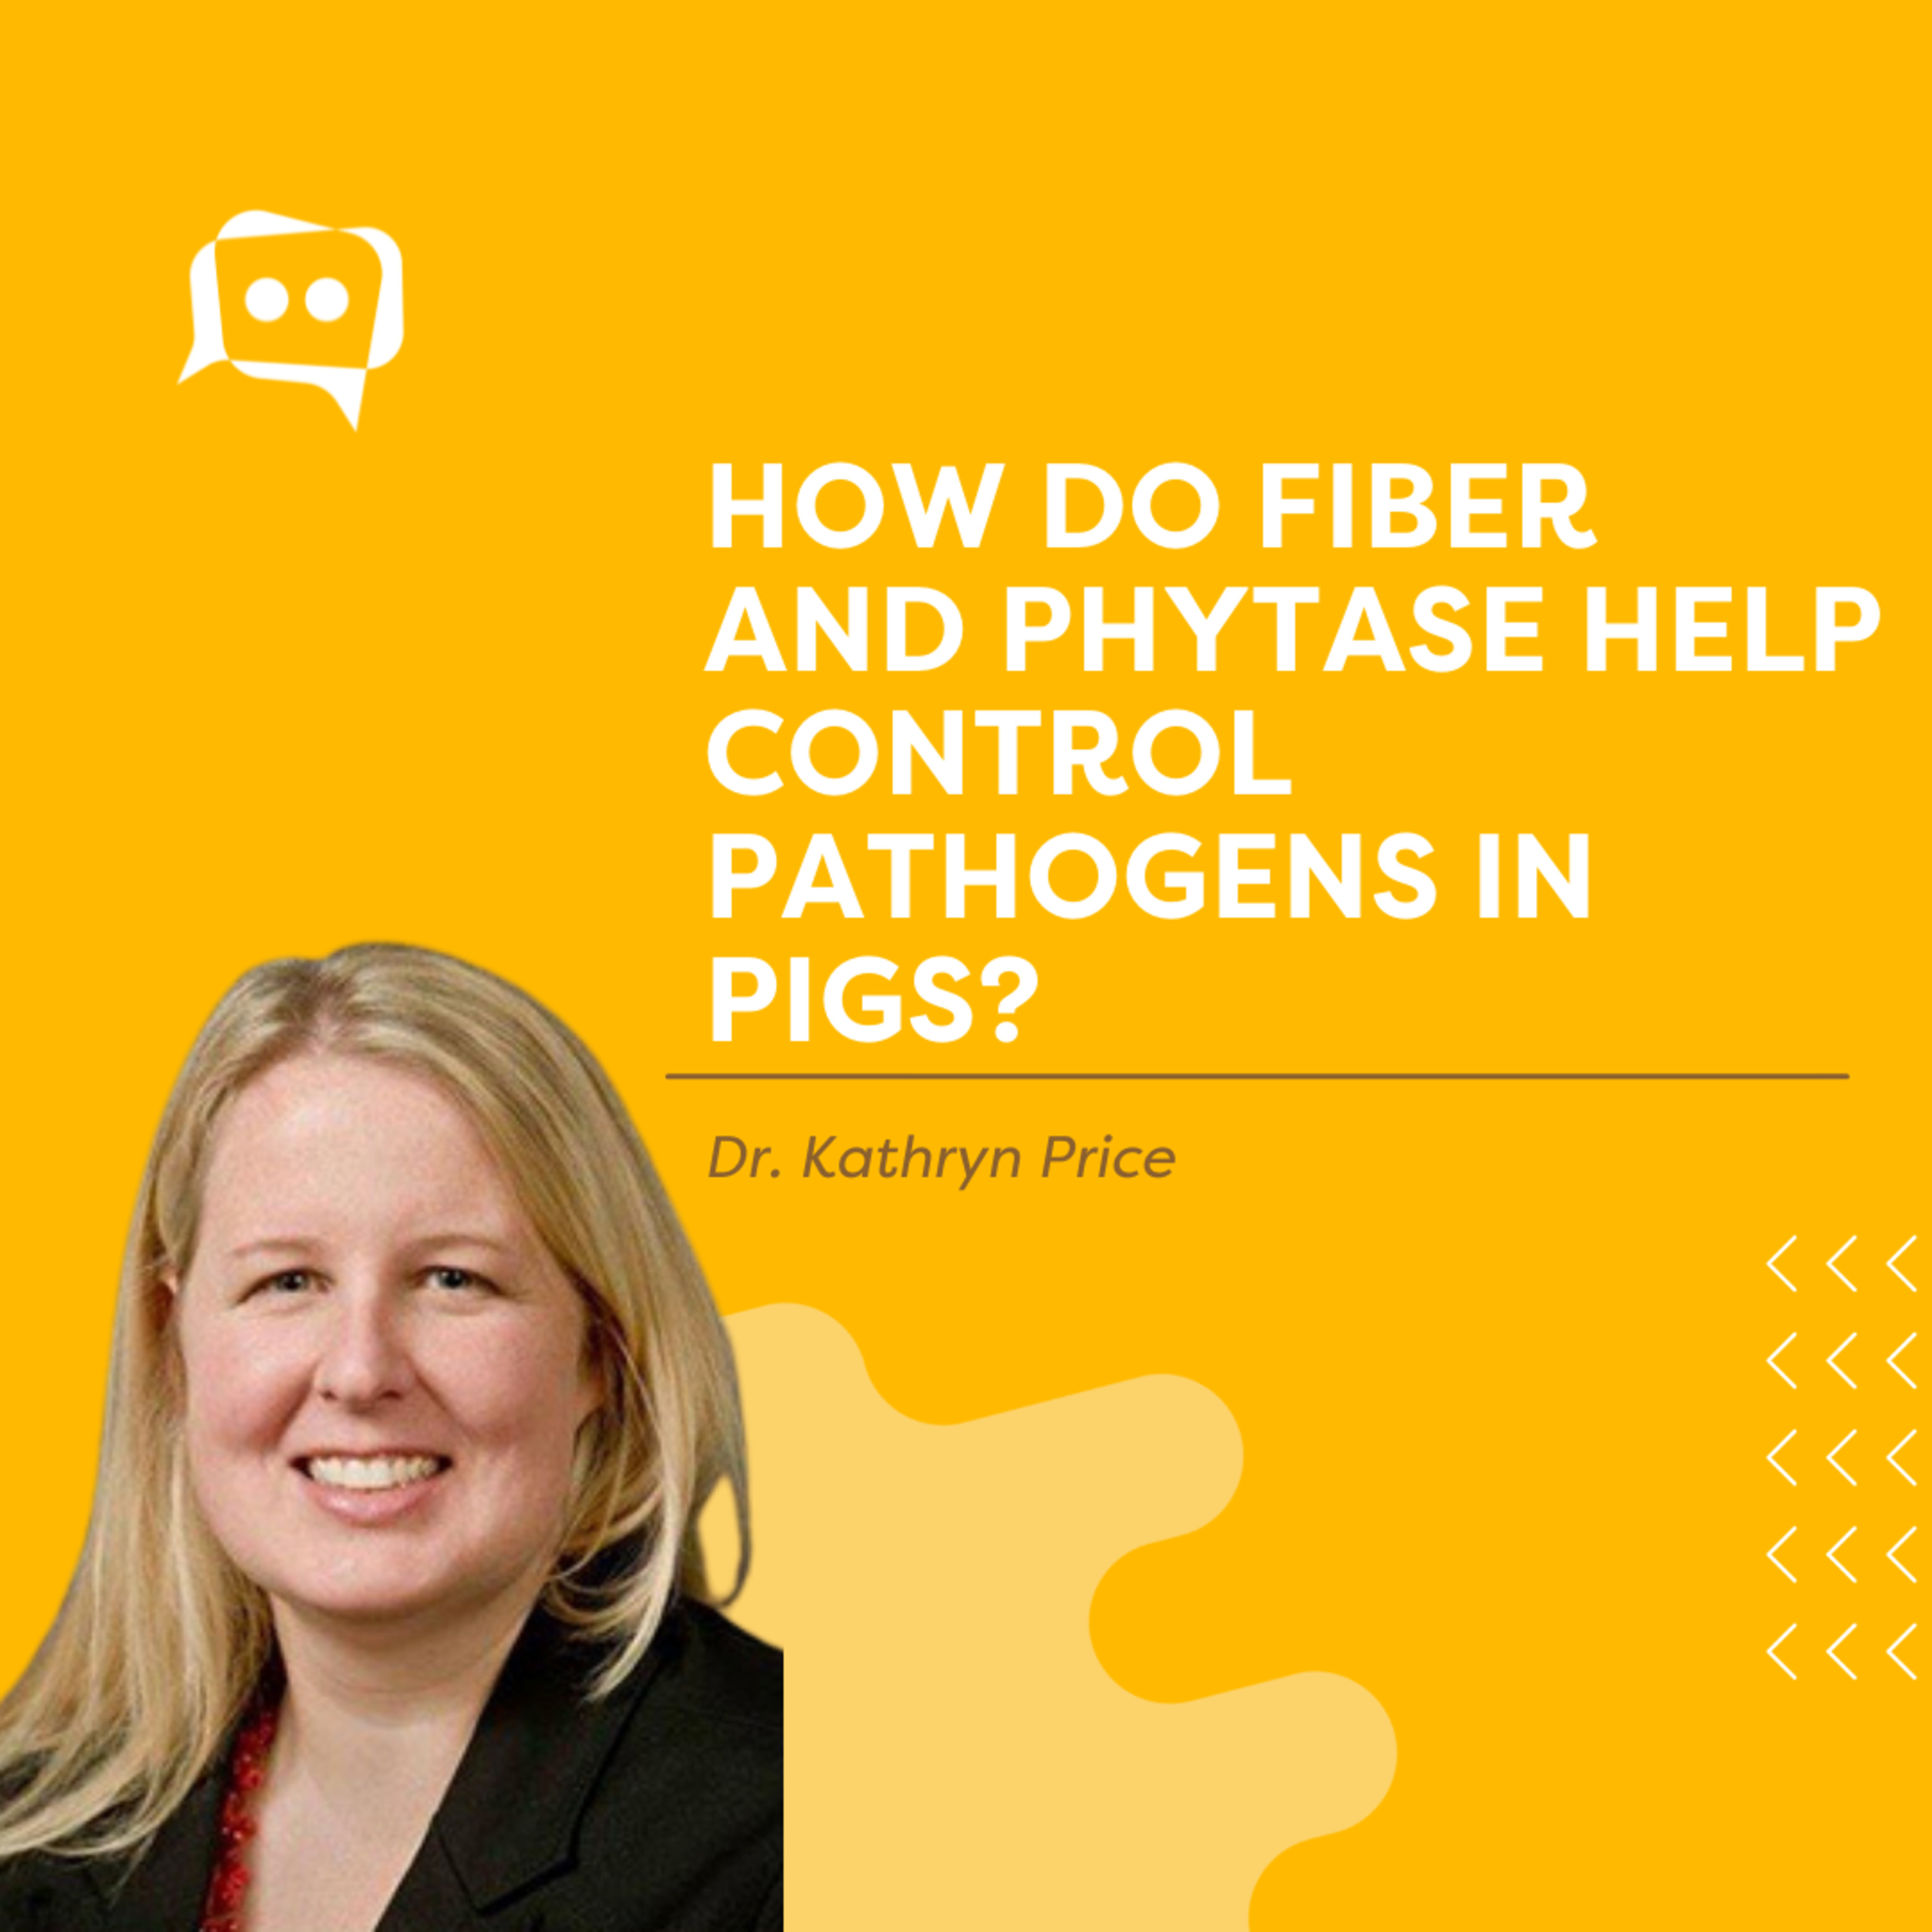 #SHORTS: How do fiber and phytase help control pathogens in pigs? With Dr. Kathryn Price